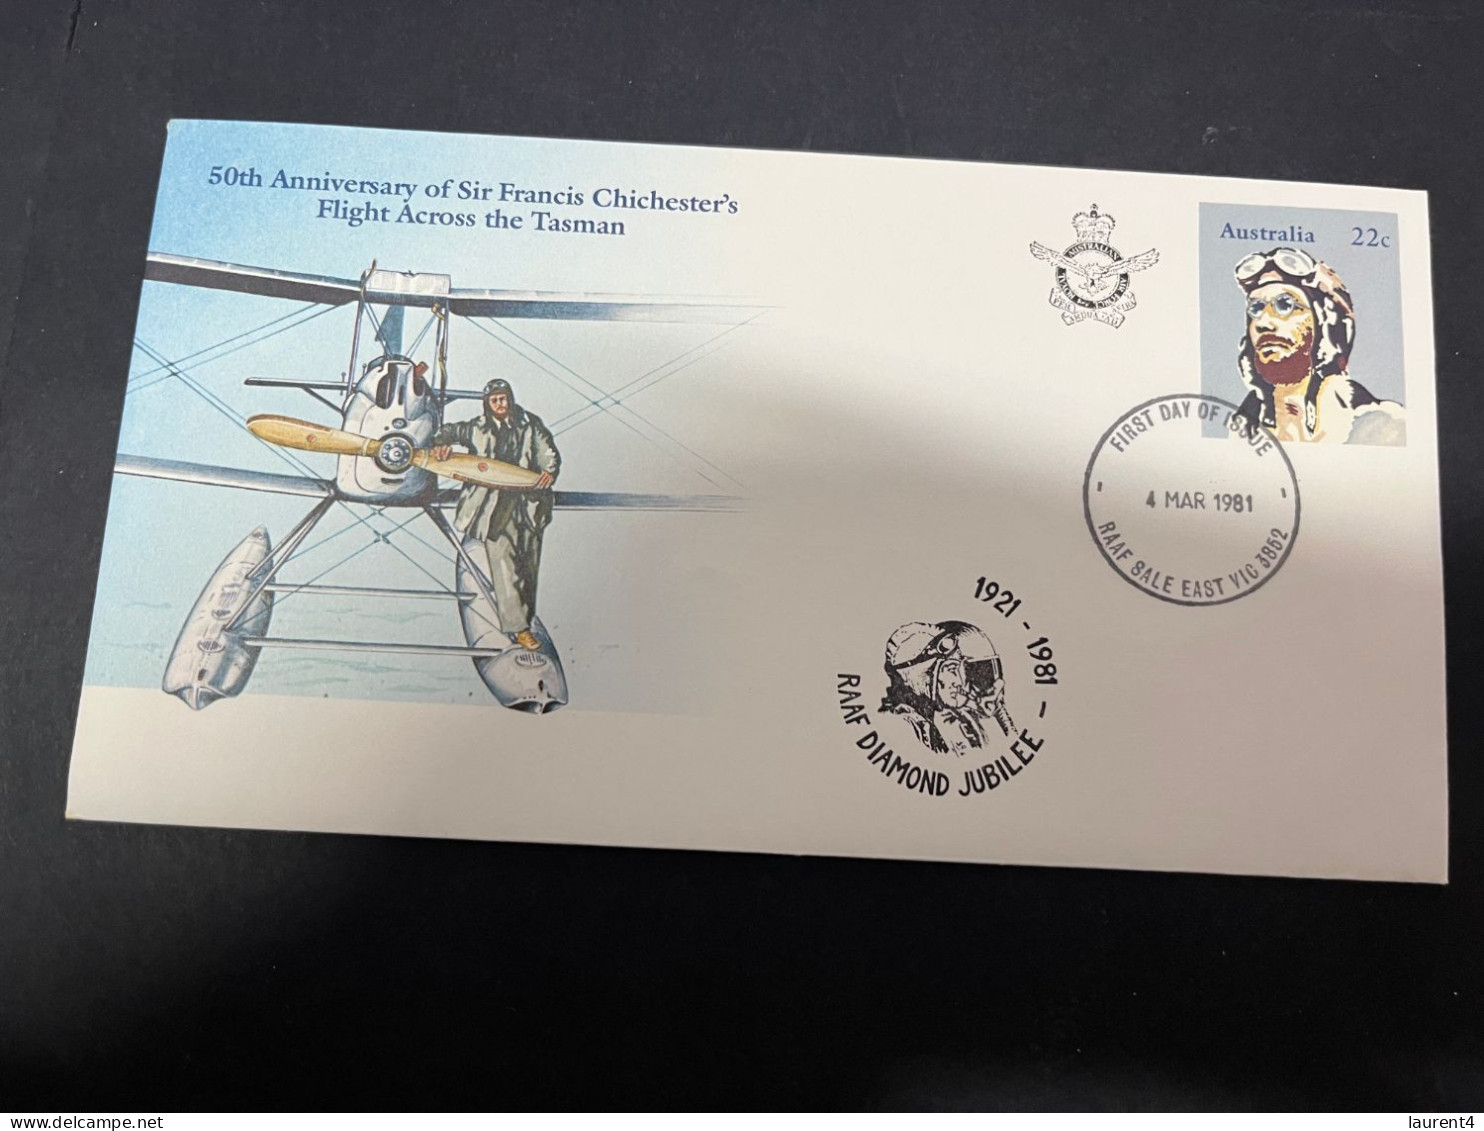 21-4-2024 (2 Z 39) Australia FDC Cover - 1981 - RAAF Diamond Jubillee (Sir Francis Chichester) 2 Covers - Primo Giorno D'emissione (FDC)